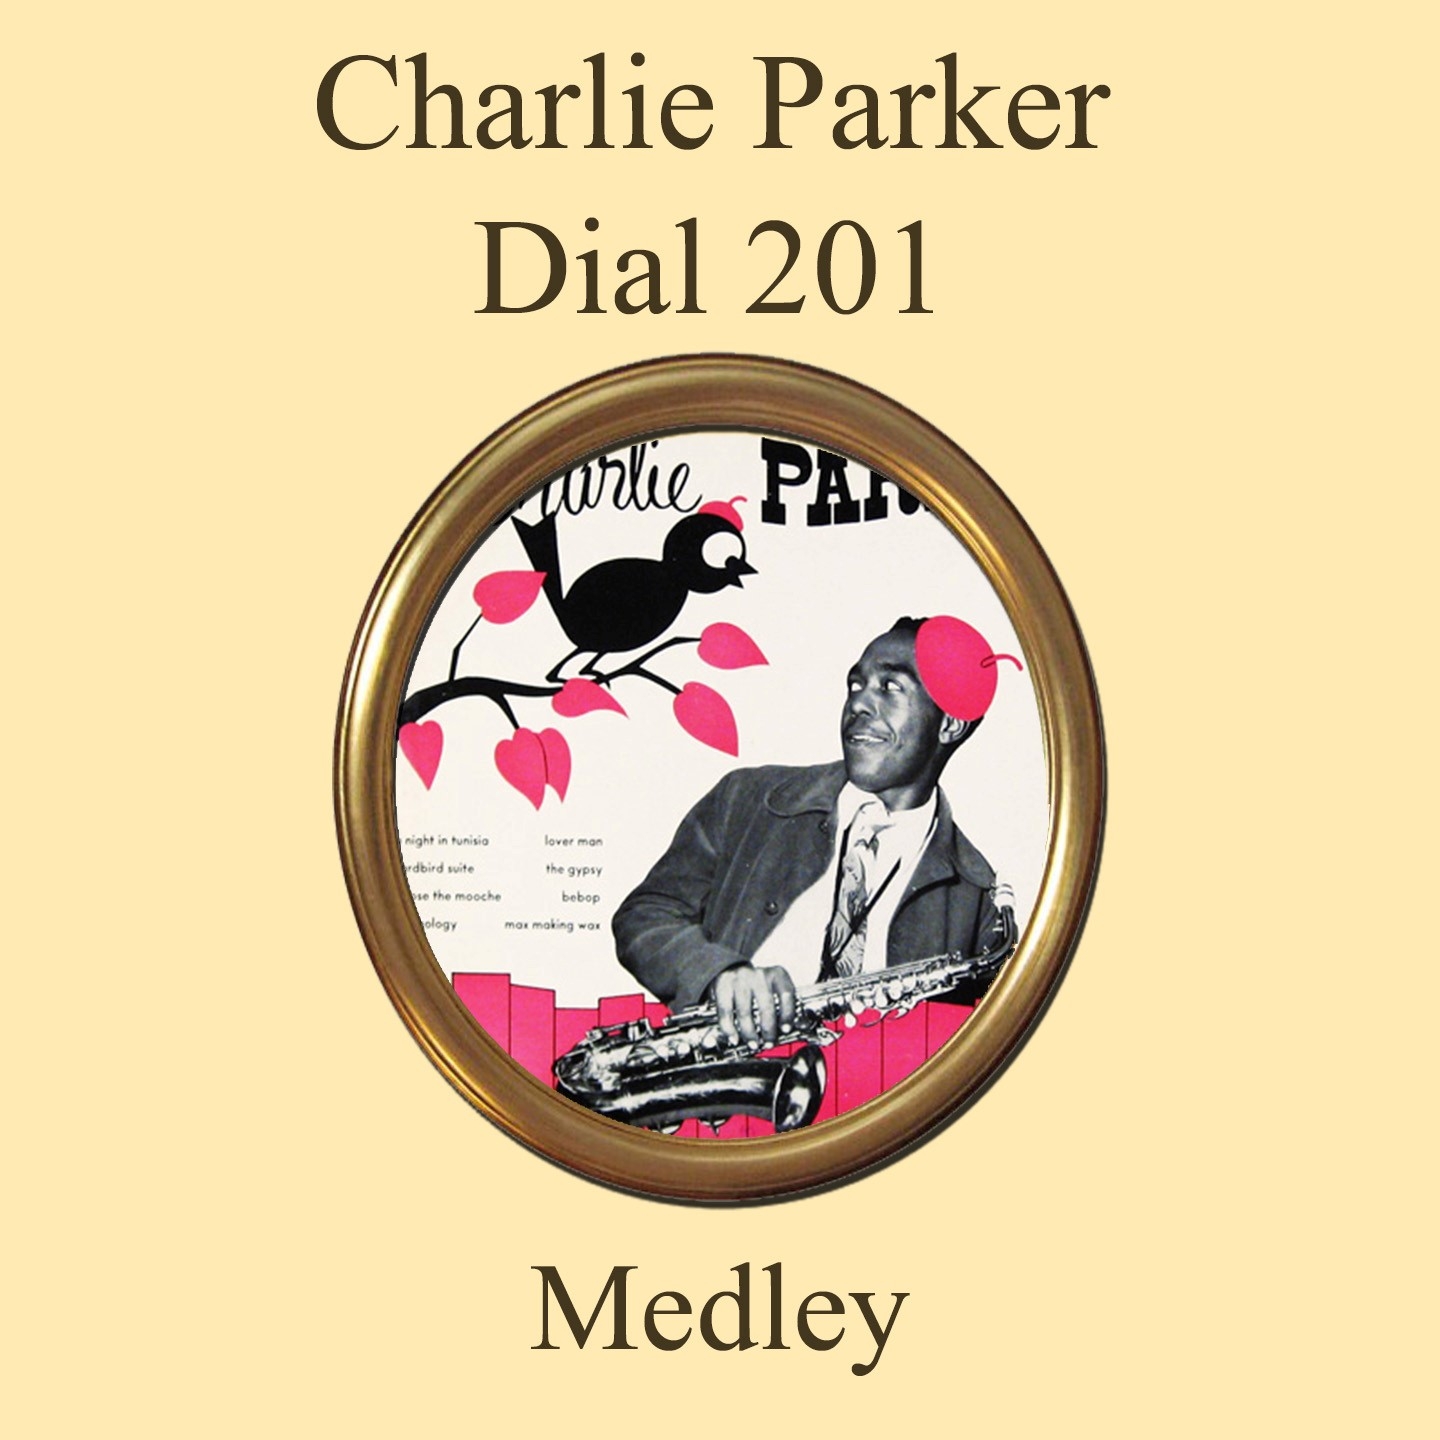 Charlie Parker Dial 201 Medley: A Night In Tunisia / Yardbird Suite / Moose The Mooche / Ornithology / Lover Man / Bebop / The Gypsy / Max Making Wax